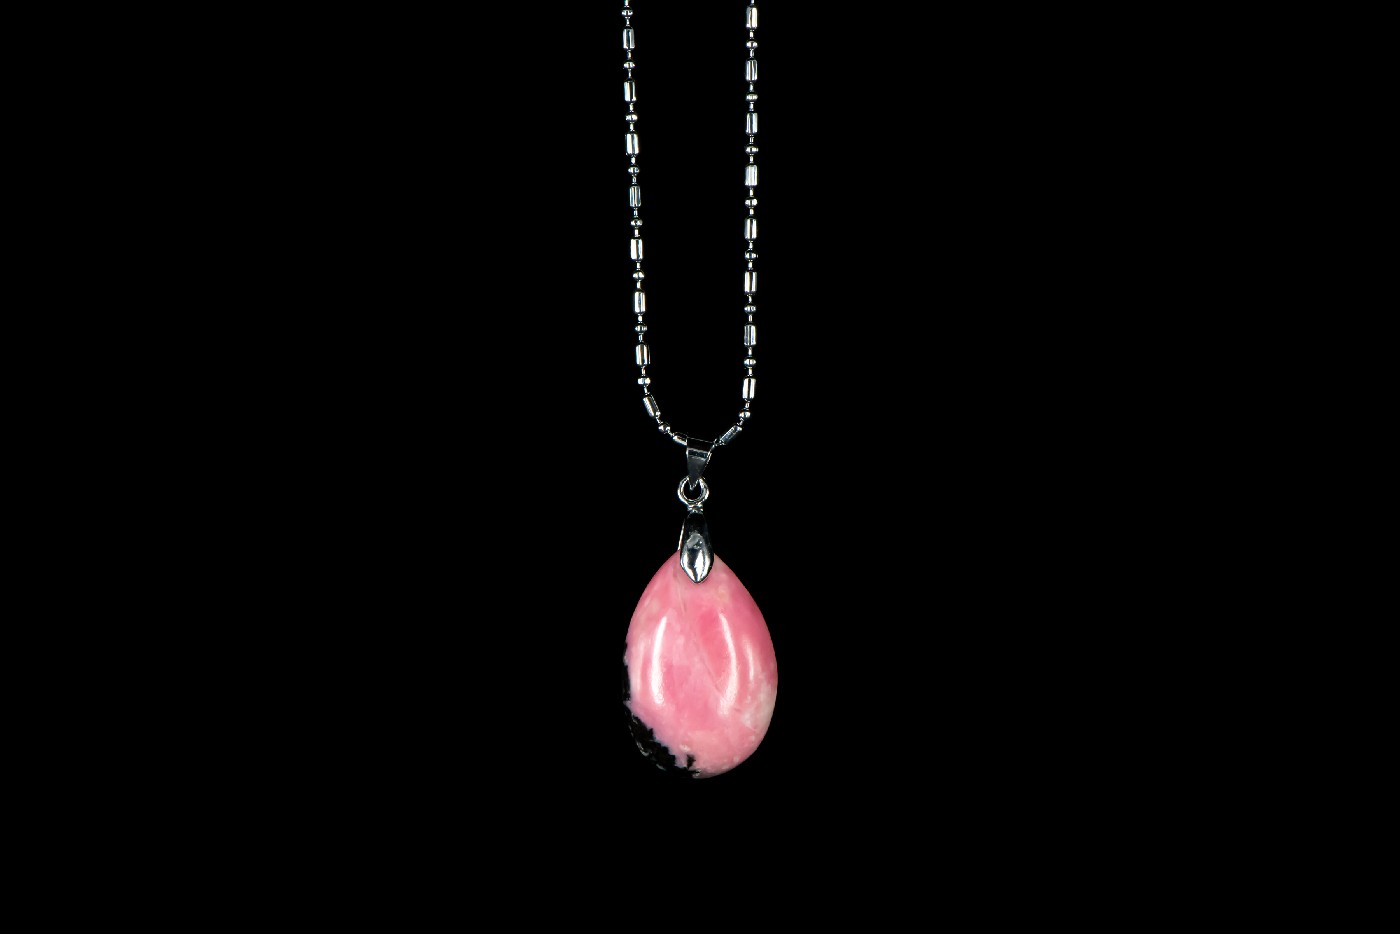 Oval Taiwan Rose Stone Pendant Necklace